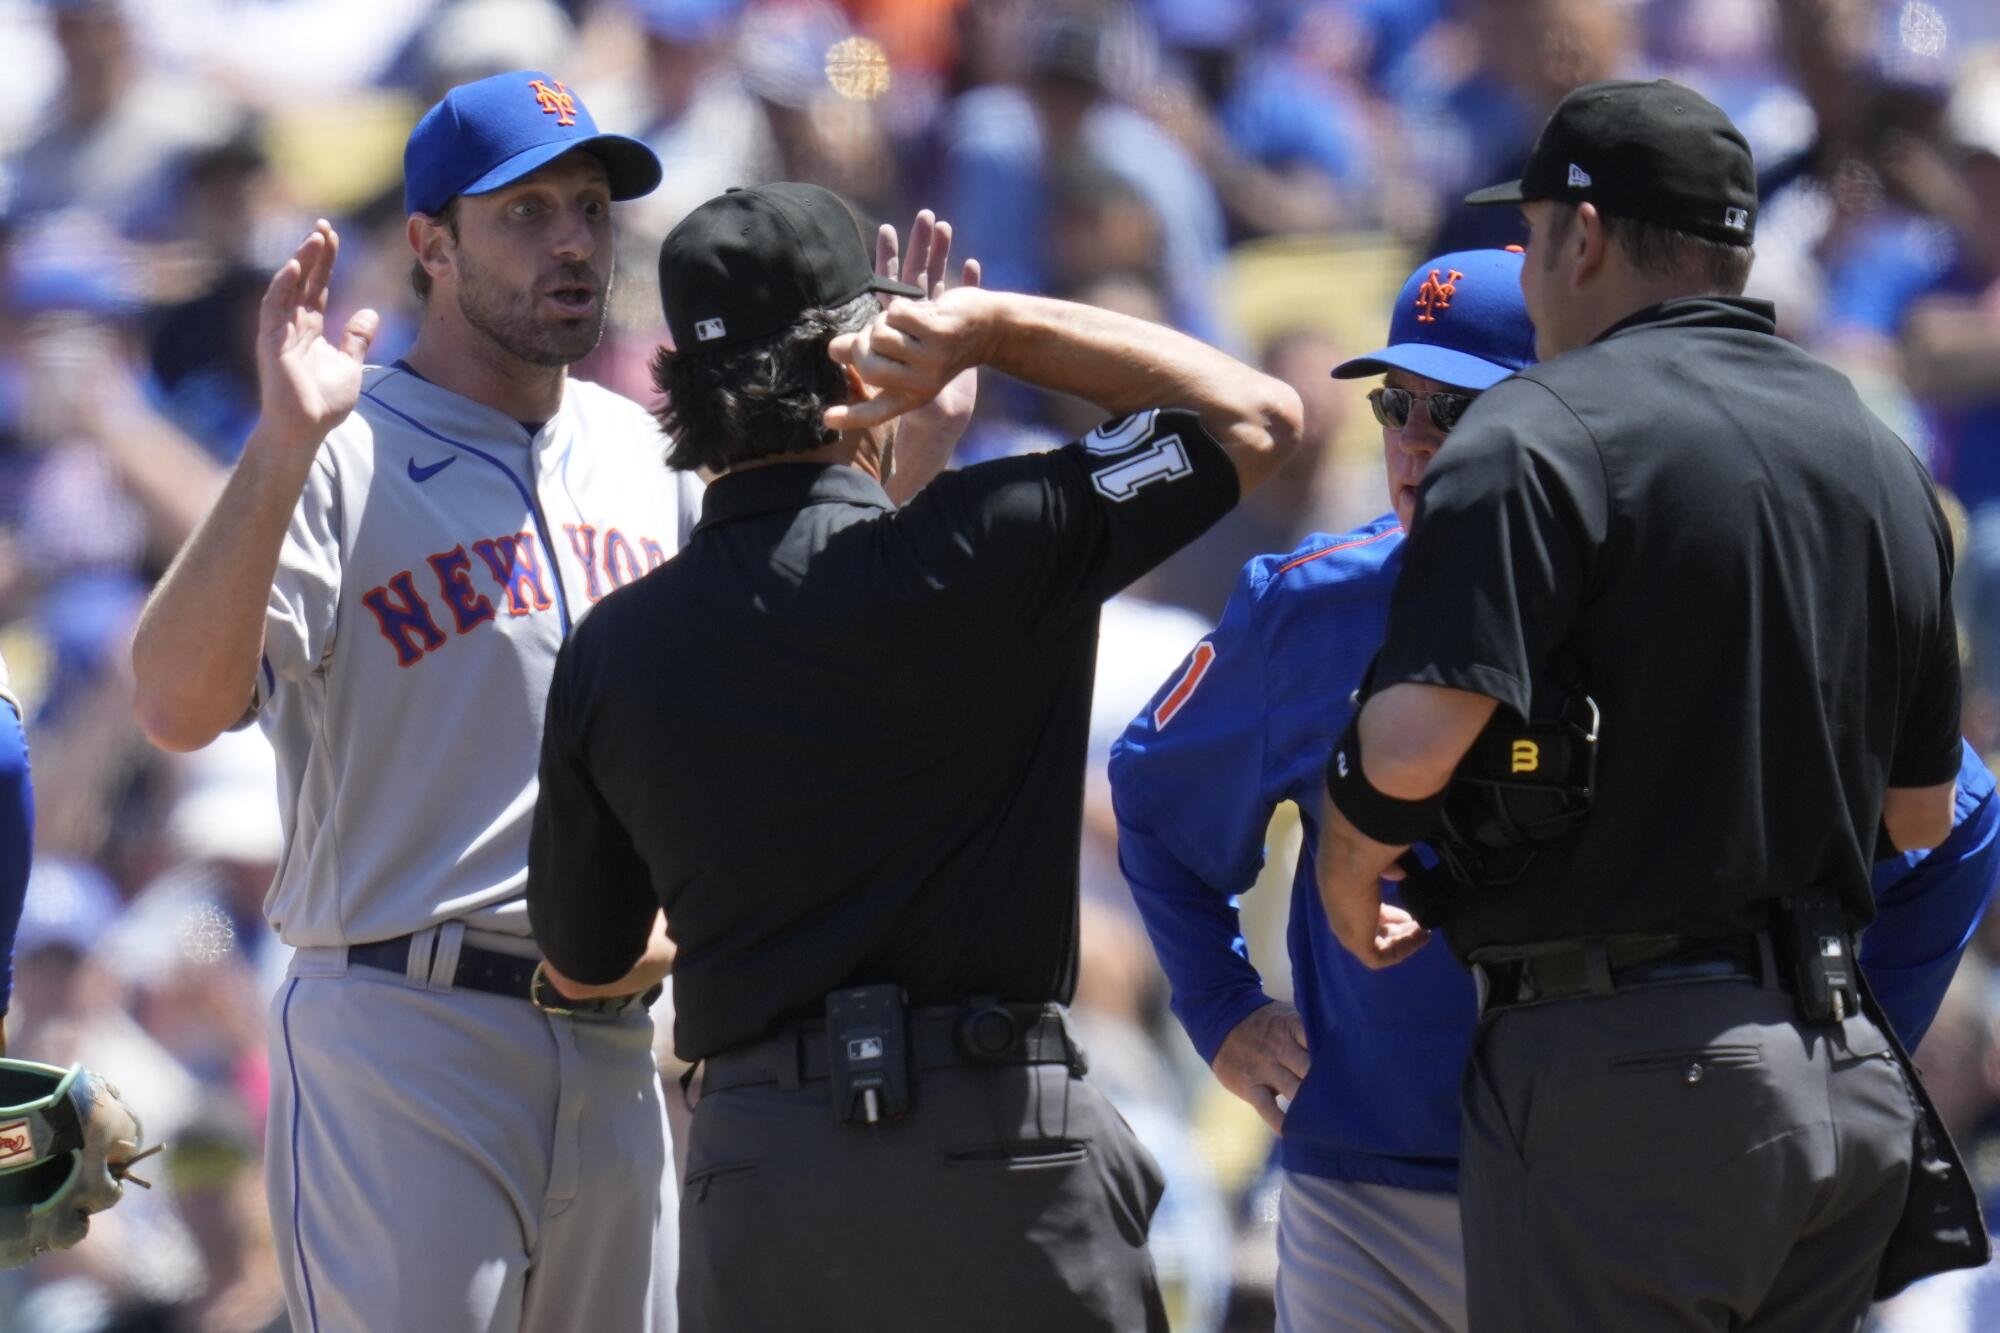 Mets pitcher Max Scherzer, left, is ejected from the game by umpire Phil Cuzzi, center, on Wednesday.